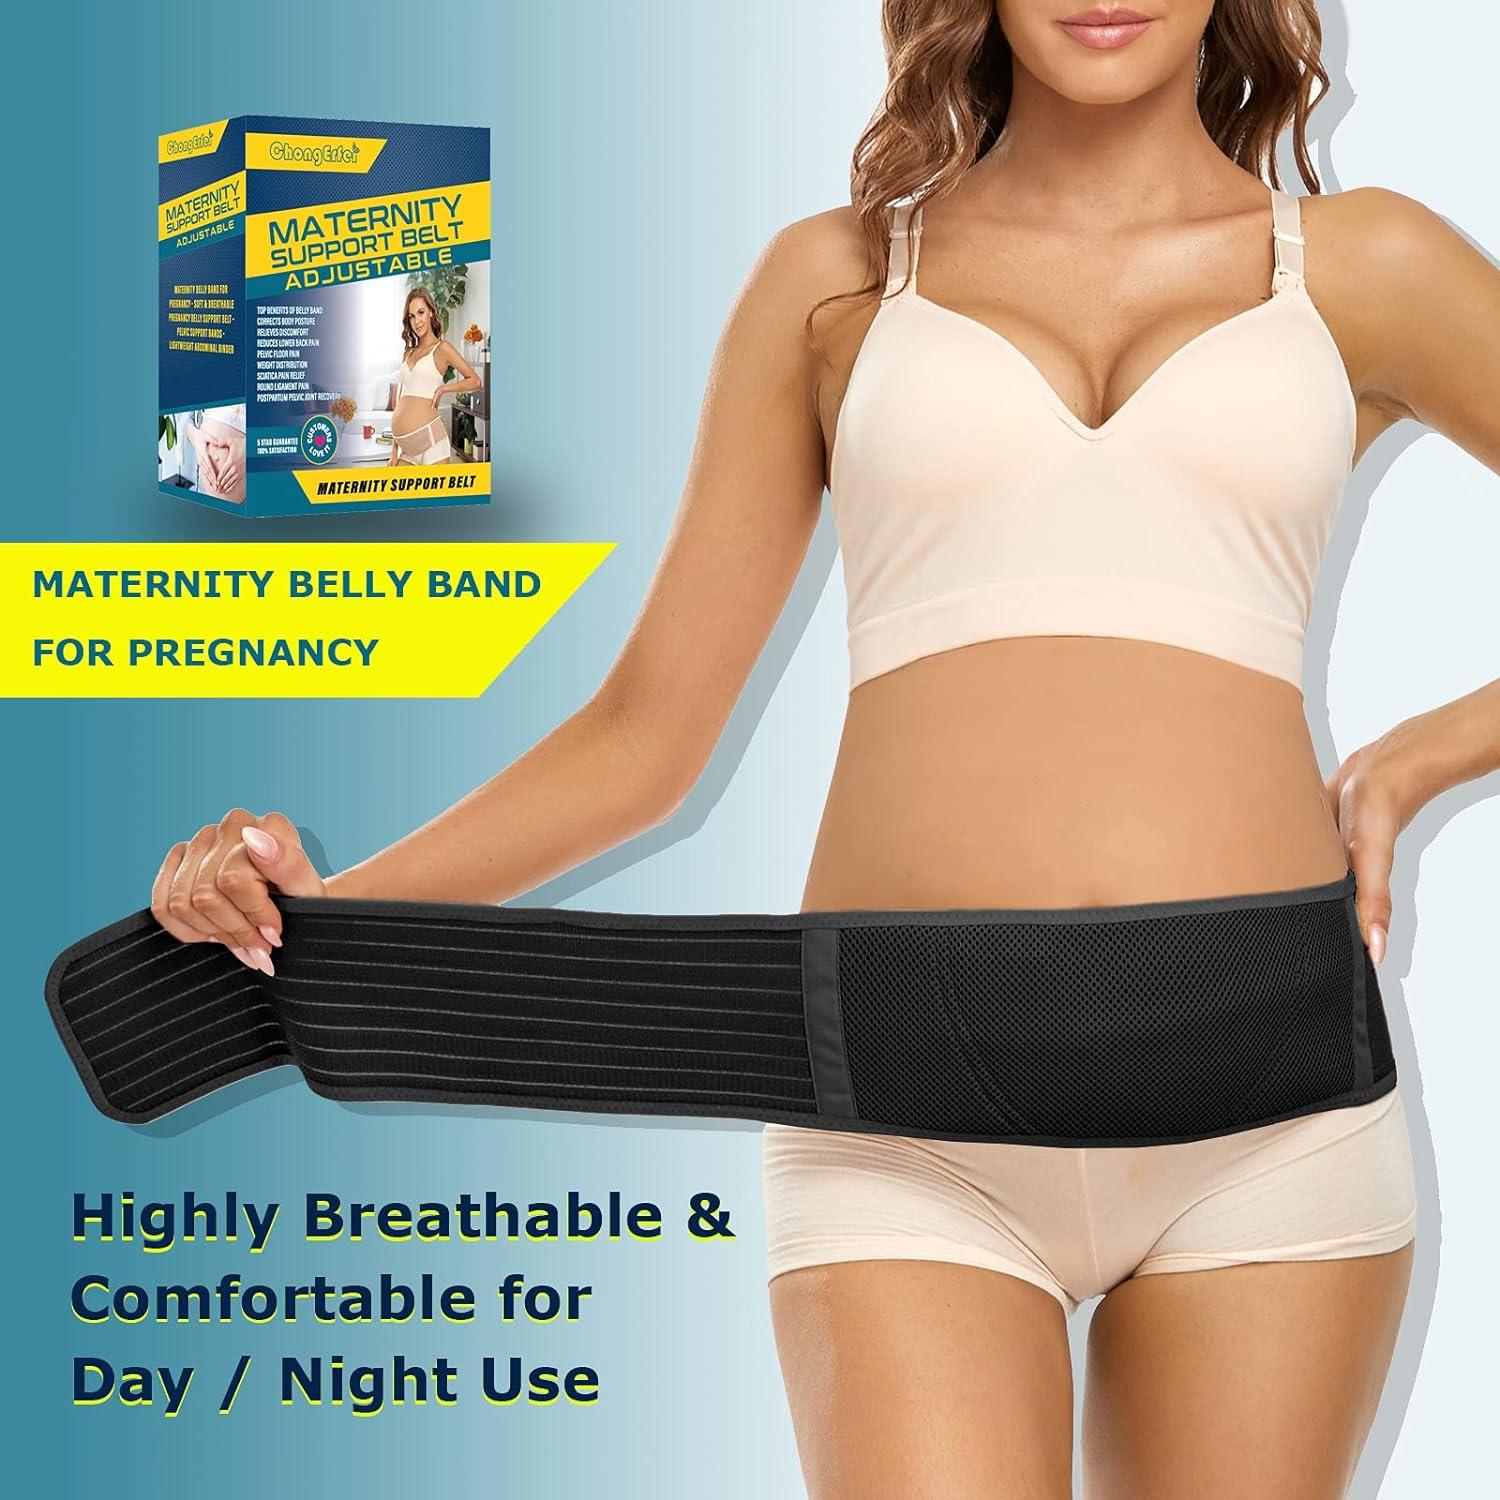 ChongErfei Pregnancy Belly Band Maternity Belt Back Support